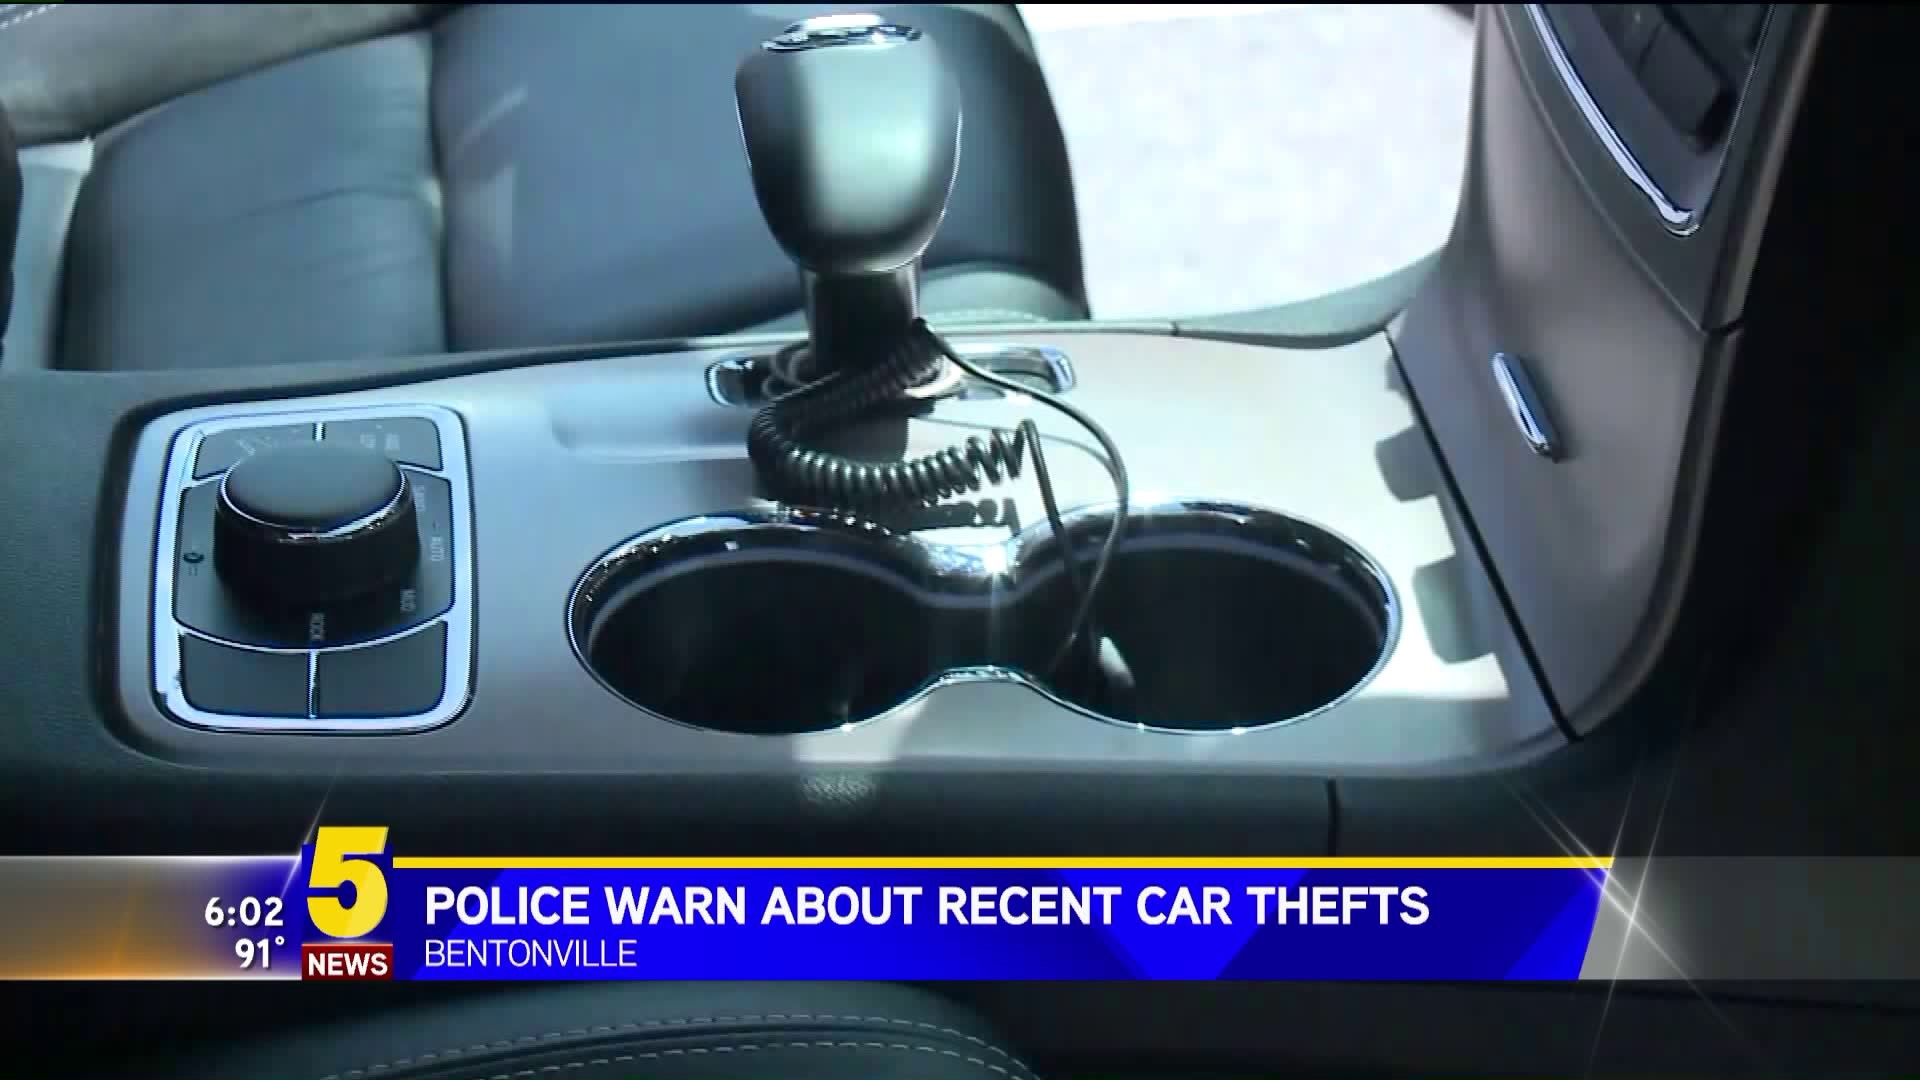 Police Warn About Recent Car Thefts